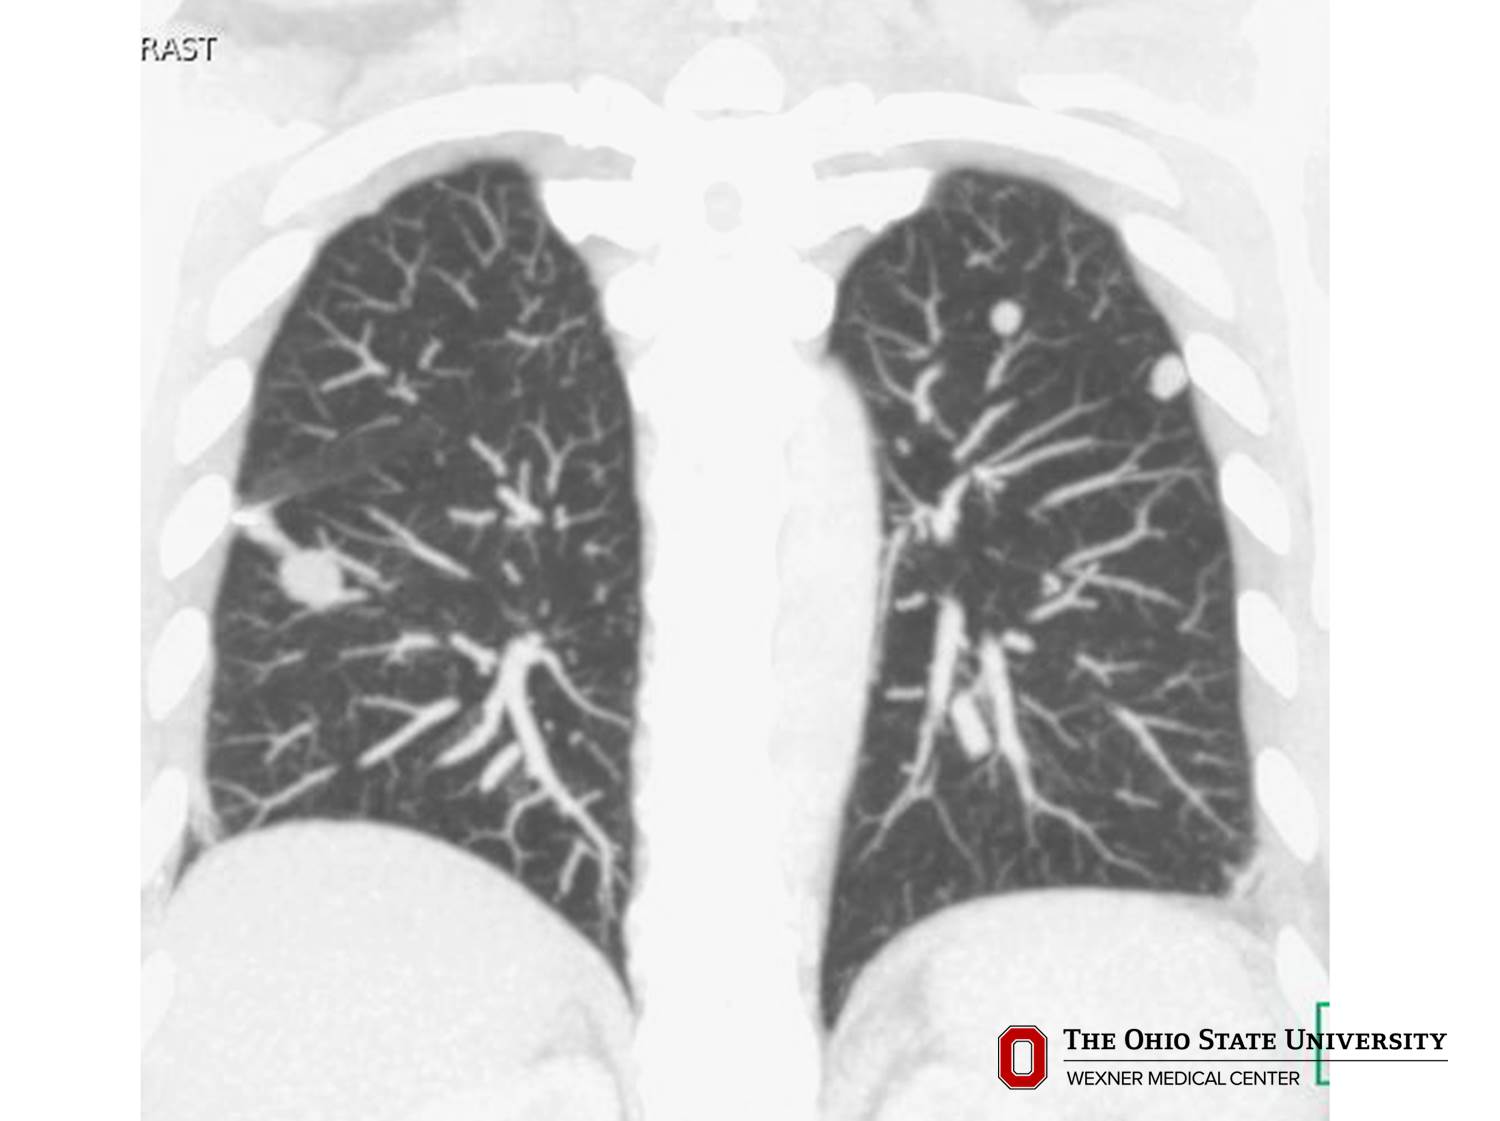 CT scan image possibly detecting cancerous areas in human tissue